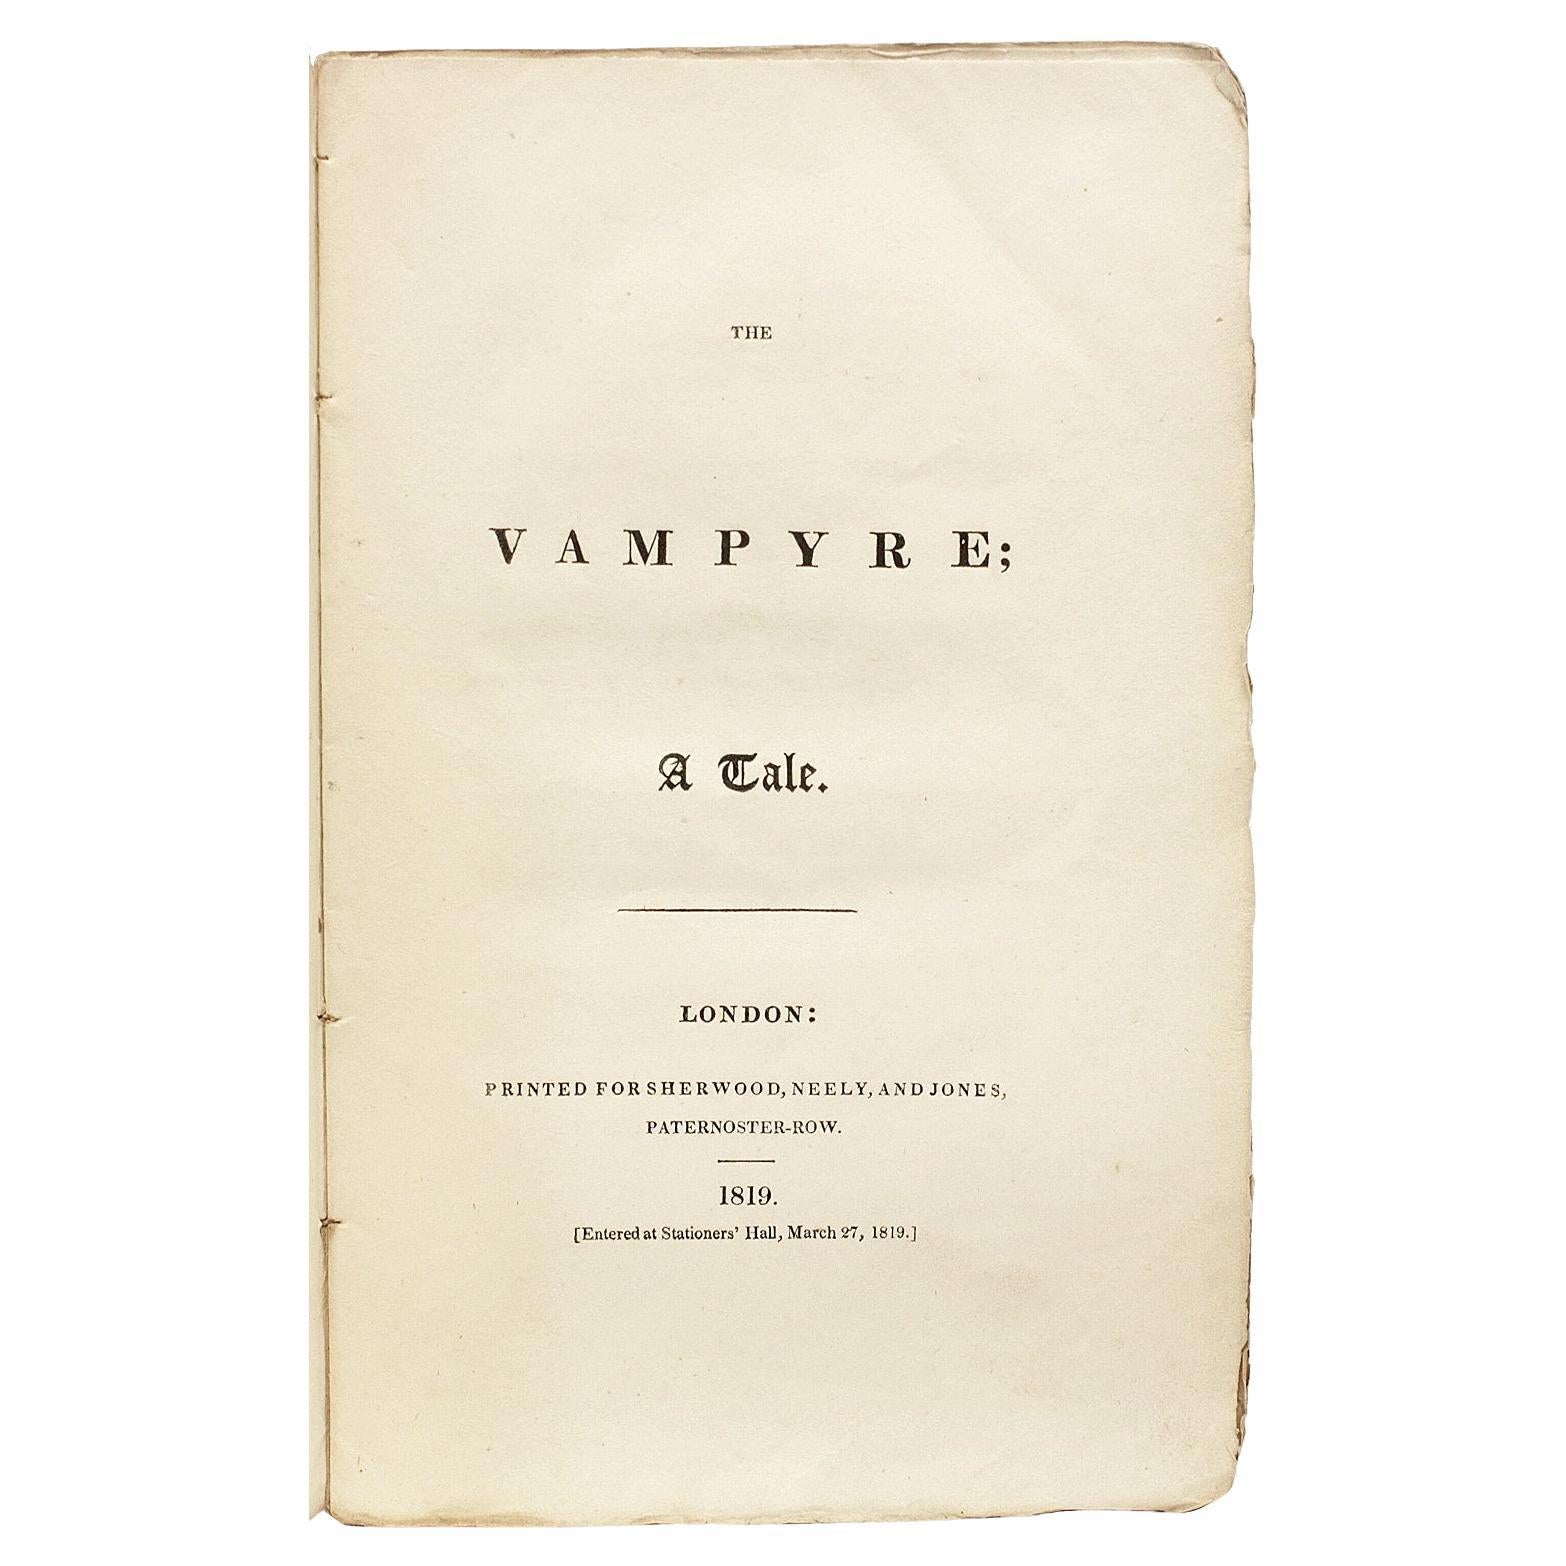 POLIDORI - The Vampyre - 1819 - FIRST EDITION - THE EARLIEST OBTAINABLE ISSUE For Sale